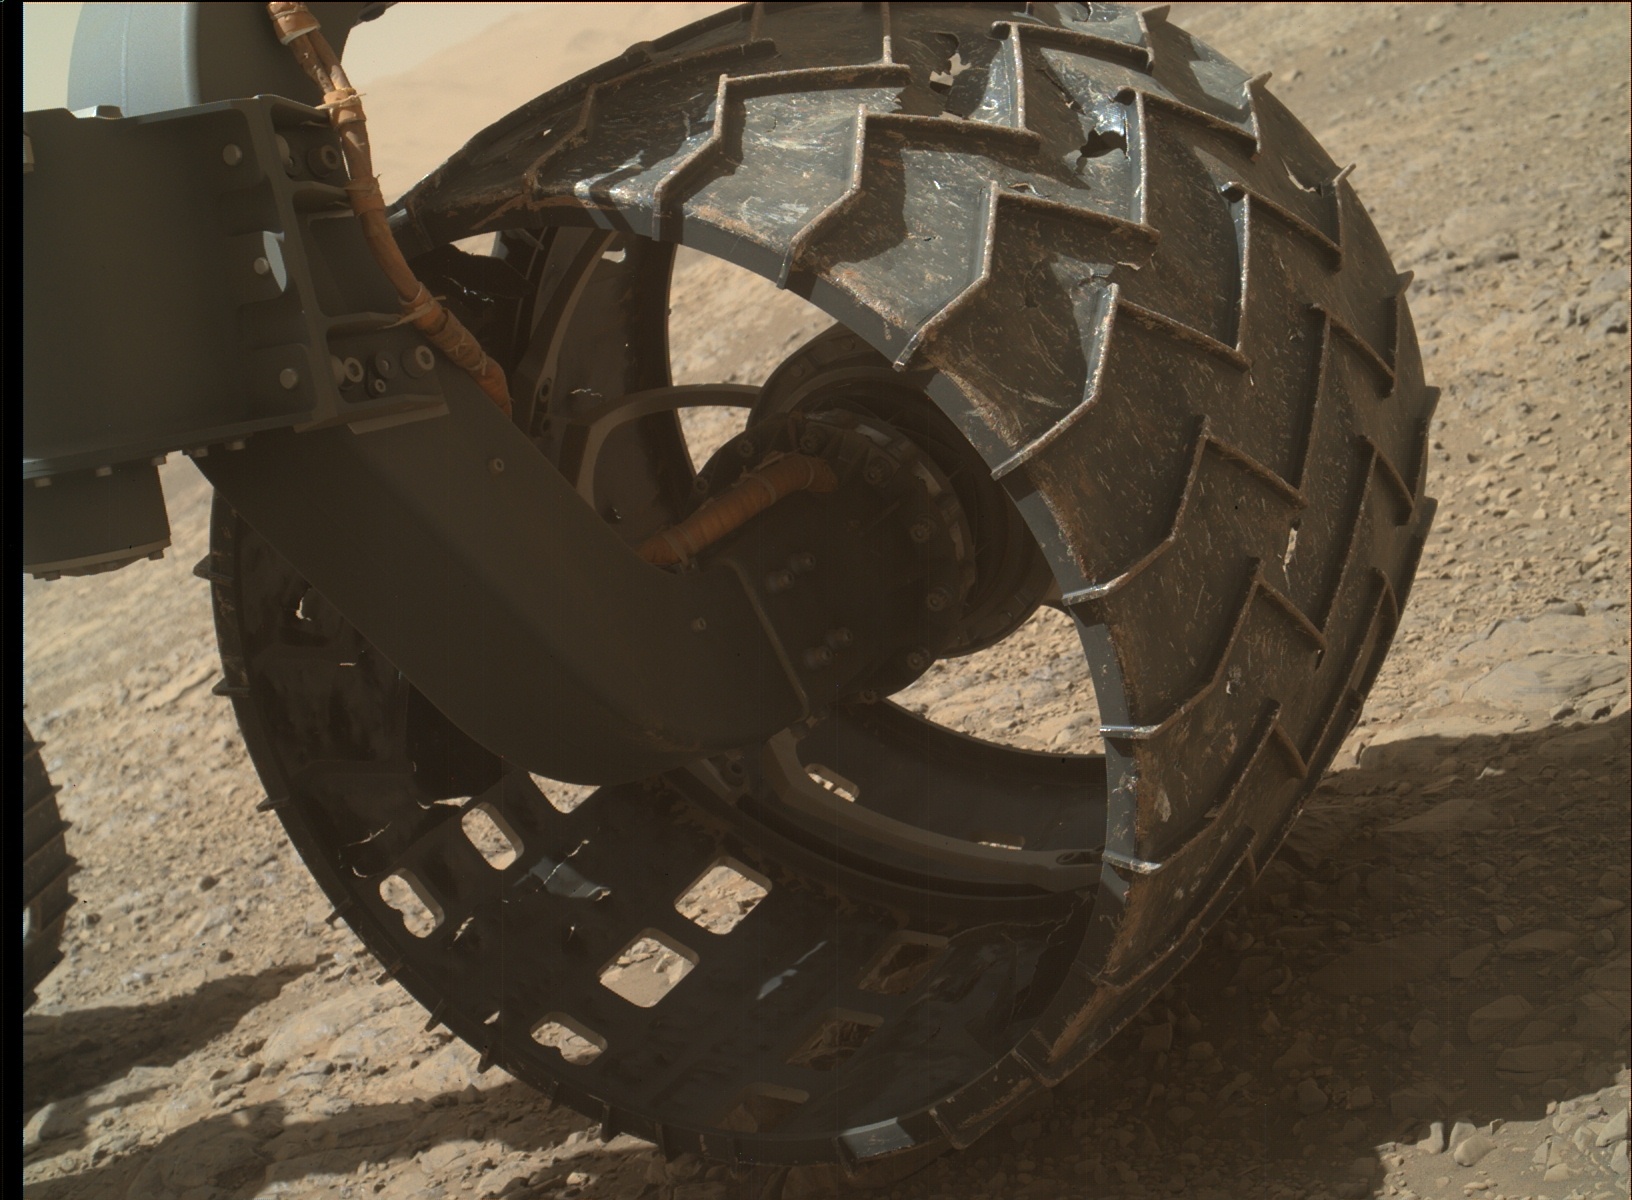 Nasa's Mars rover Curiosity acquired this image using its Mars Hand Lens Imager (MAHLI) on Sol 1989